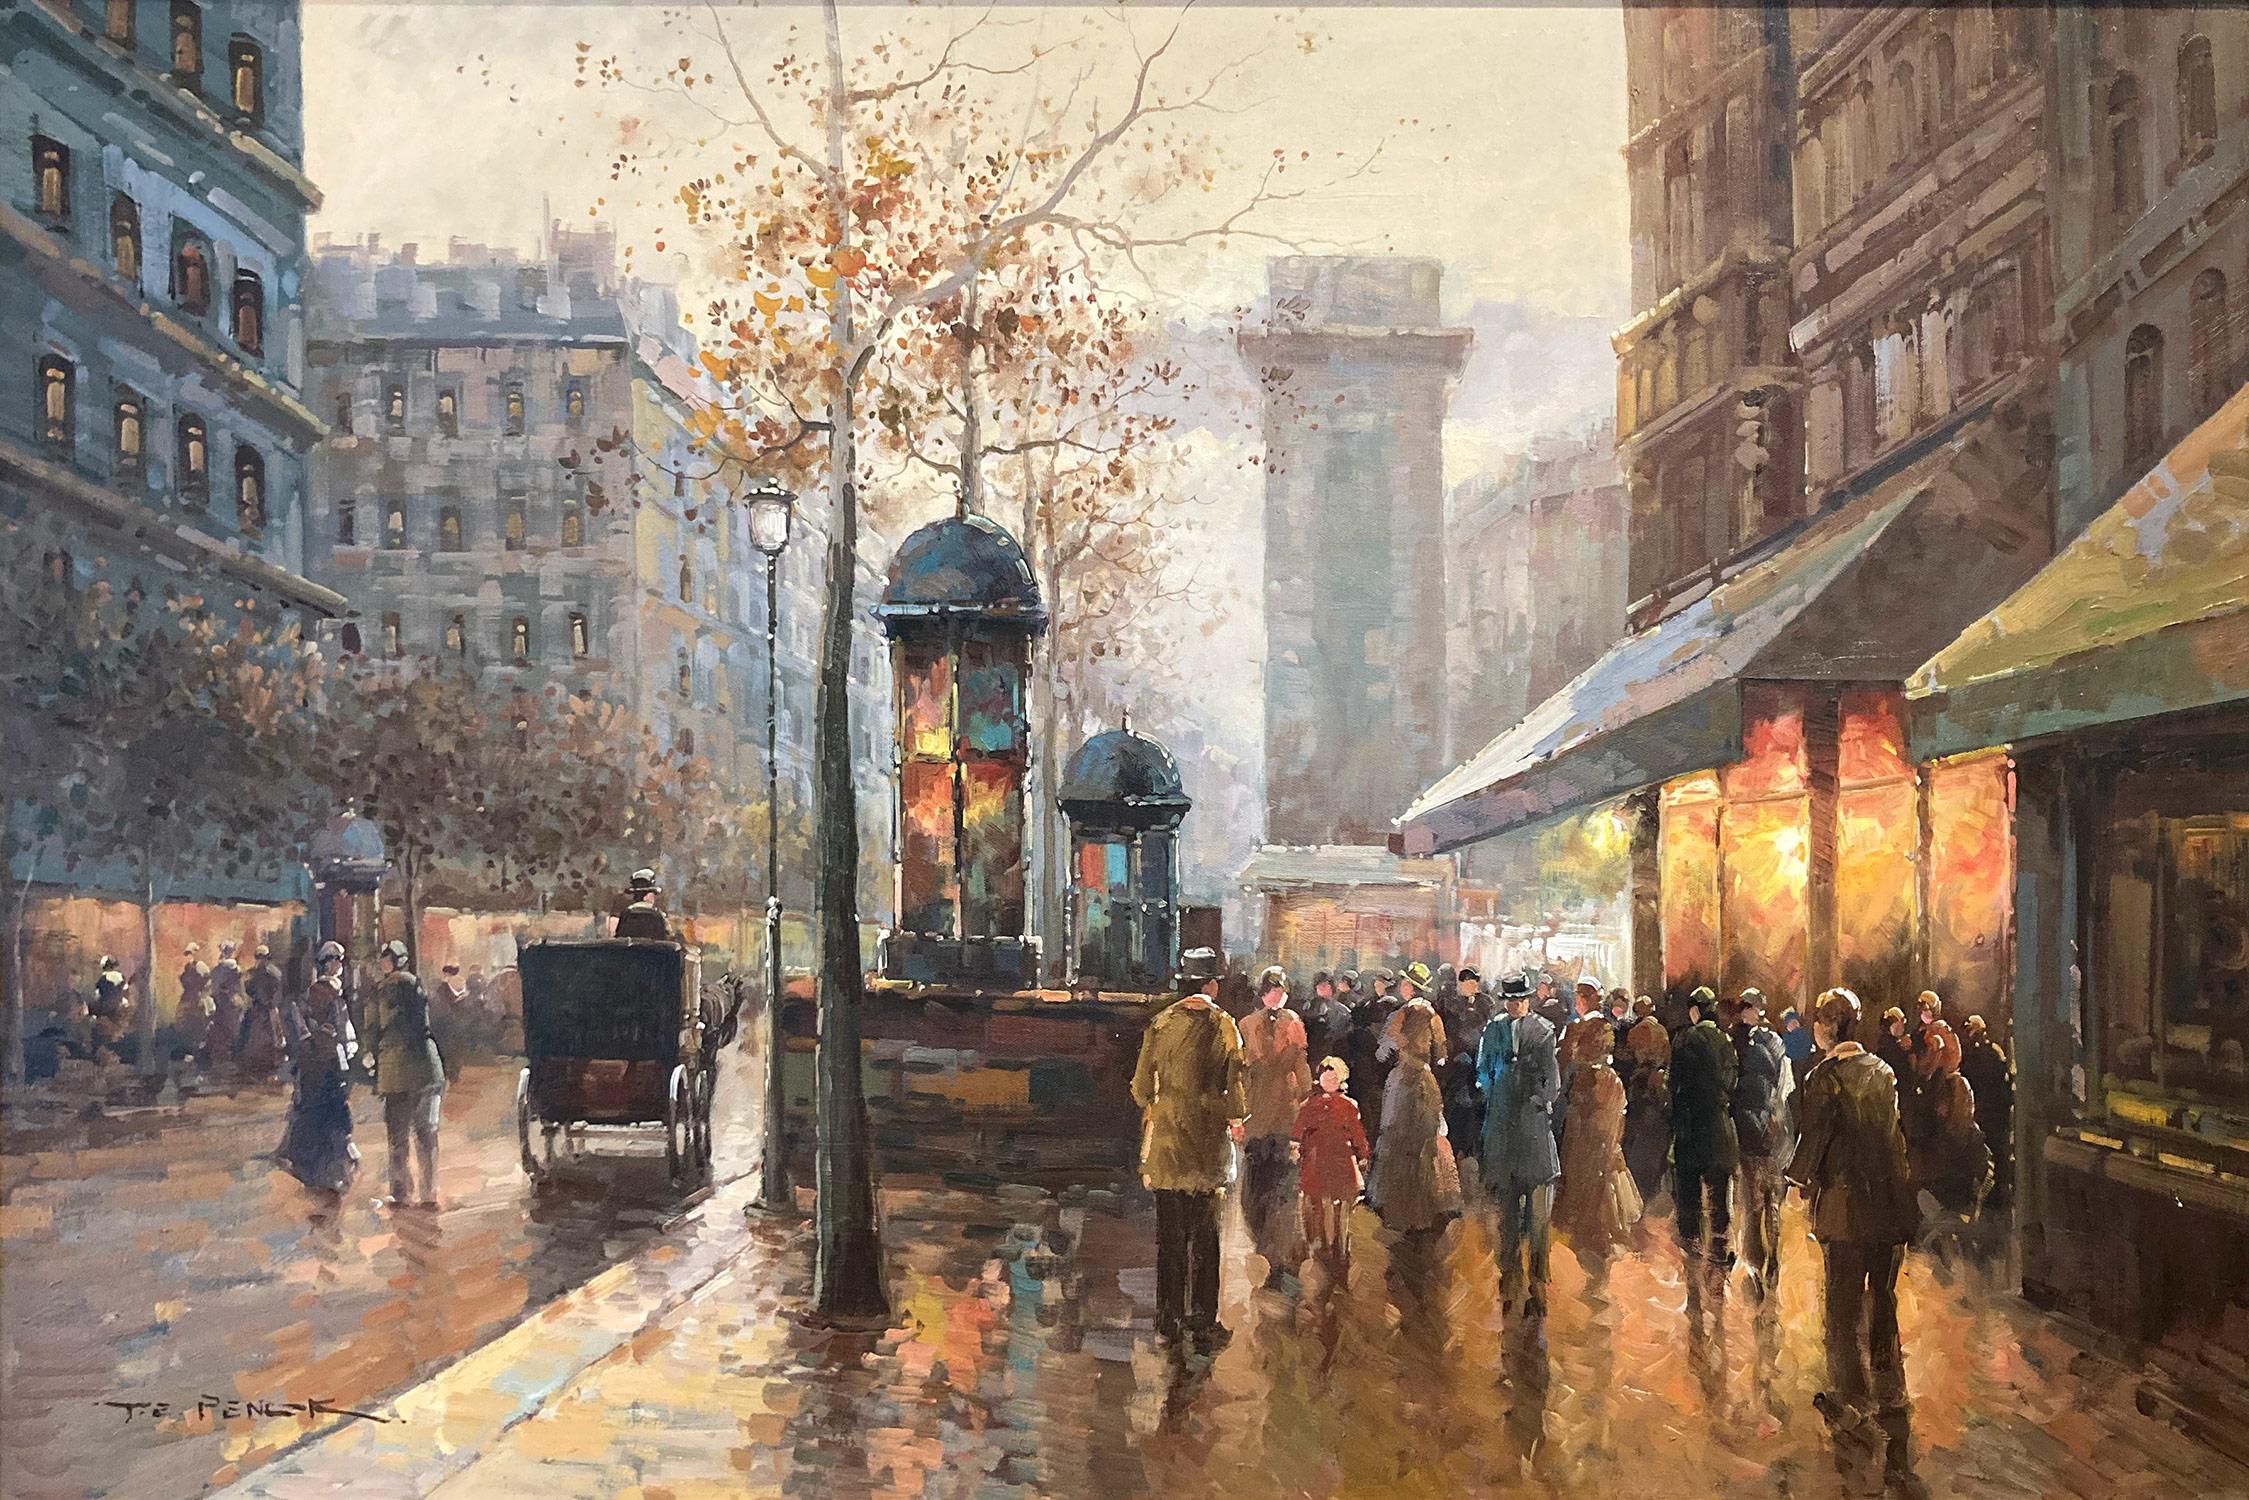 A beautiful oil on canvas painting by the French artist, Te Pencke. Pencke was a Parisian painter known for his colorful cityscapes depicting the times of his generation. His work is comparable to those of Jules Herve, Antoine Blanchard and Edouard